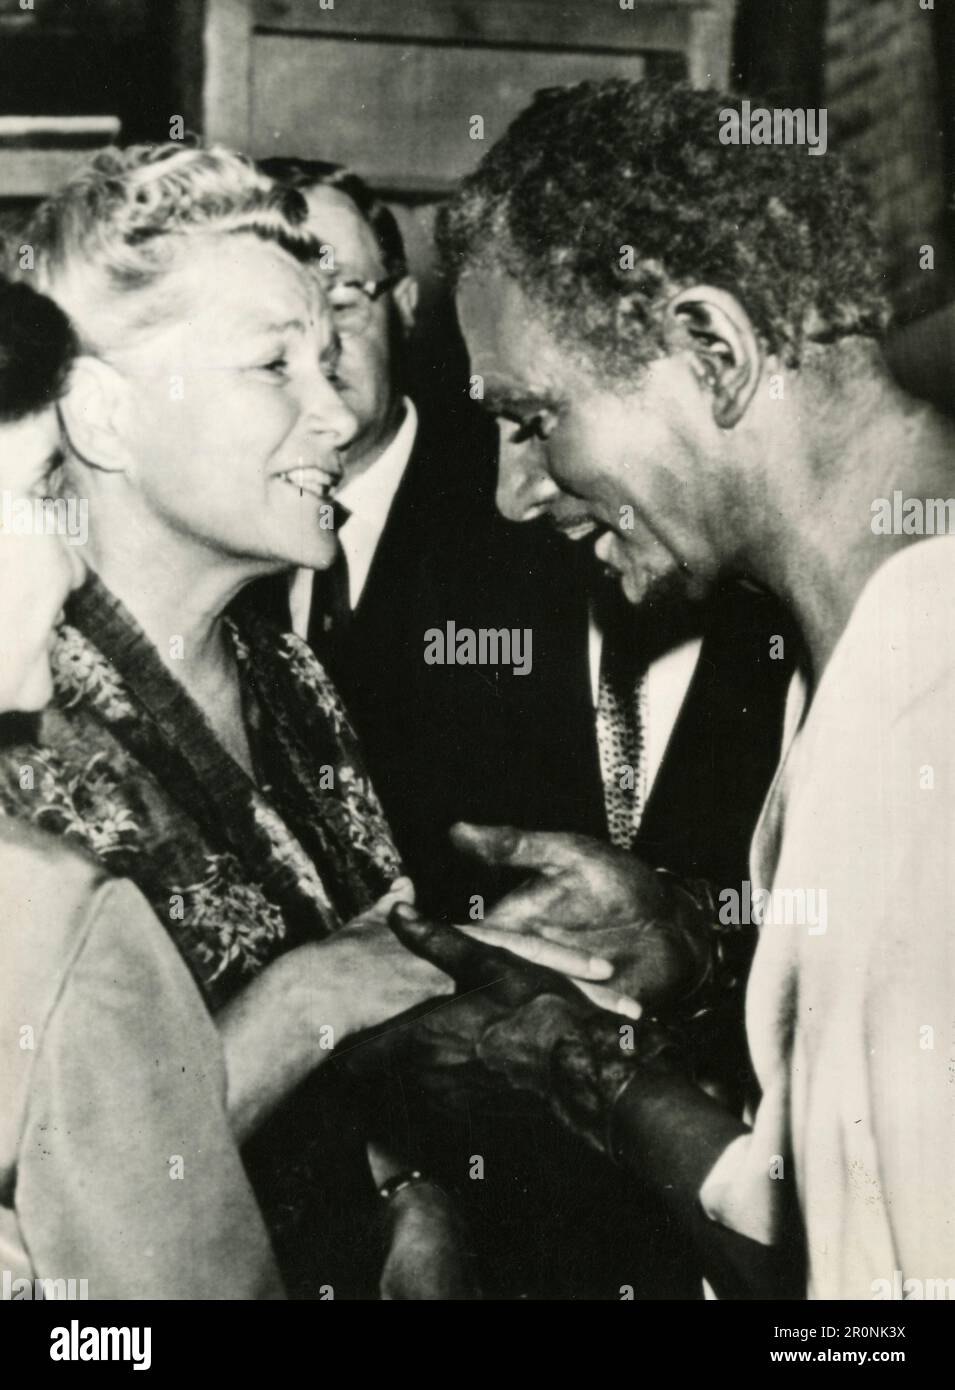 Unidentified Cultural Affairs woman Minister greeting unidentified black man, Moscow, Russia 1966 Stock Photo